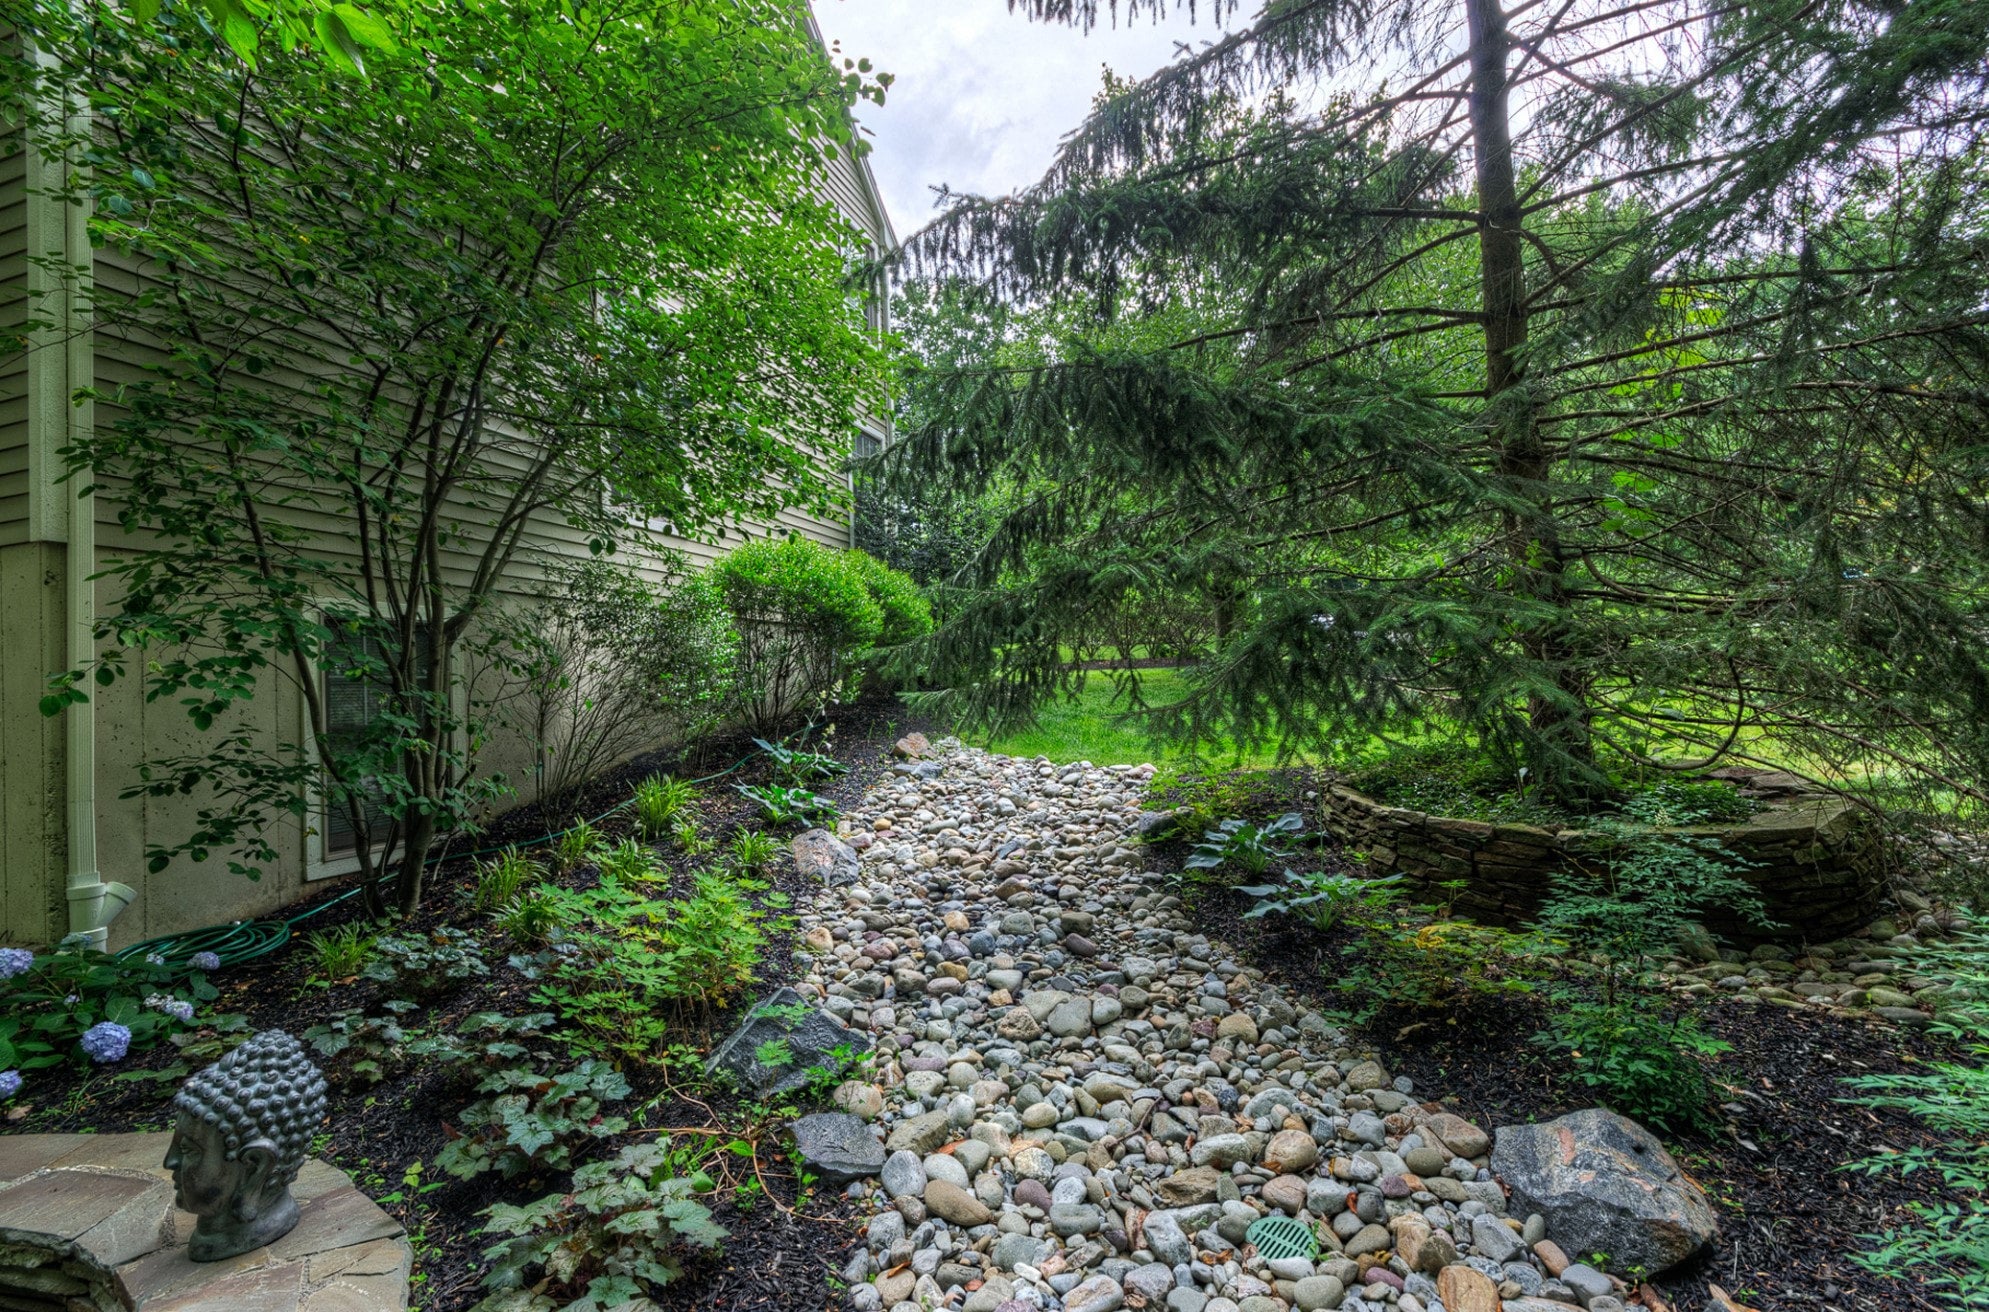 3/4 Natural River Stone - P&L Landscaping